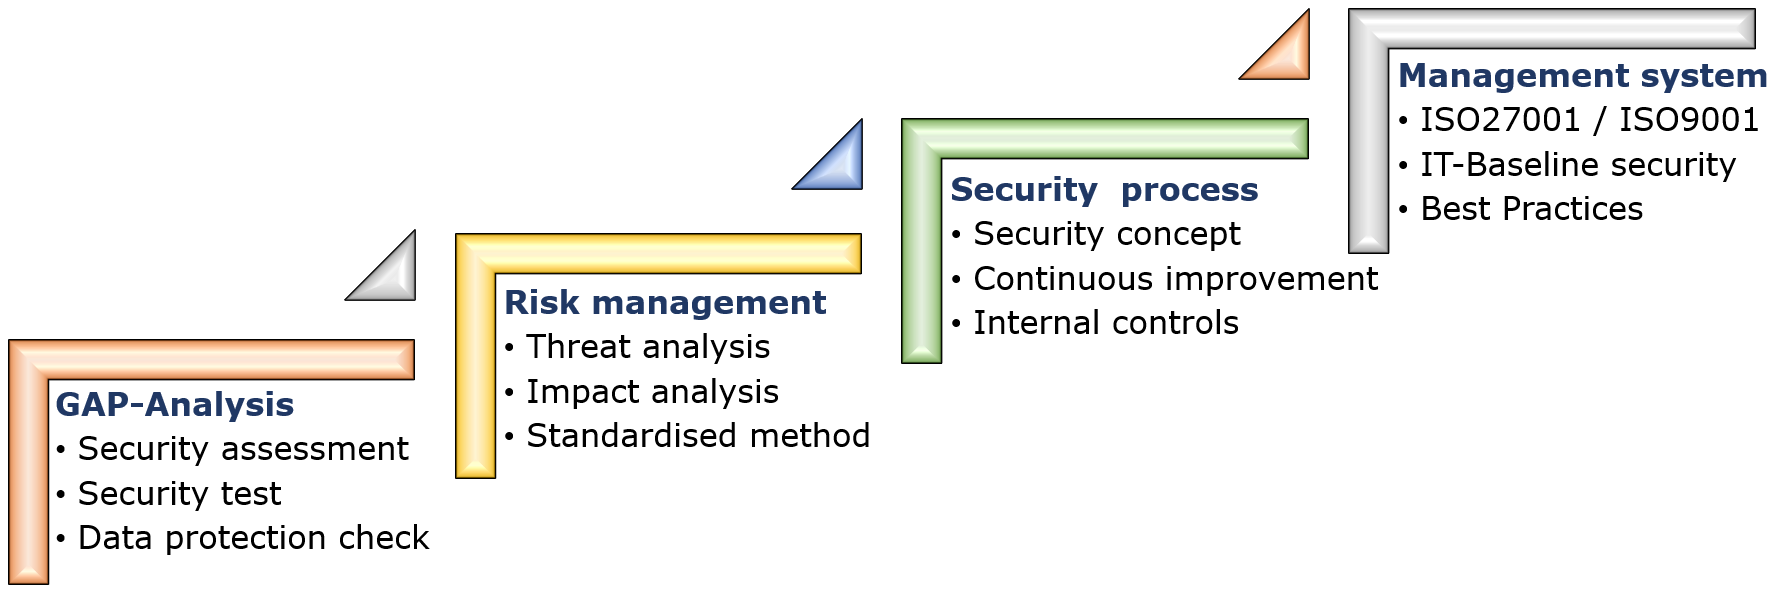 Image: Managed security process in 4 steps - GAP Analysis, Risk management, Security process, Management system